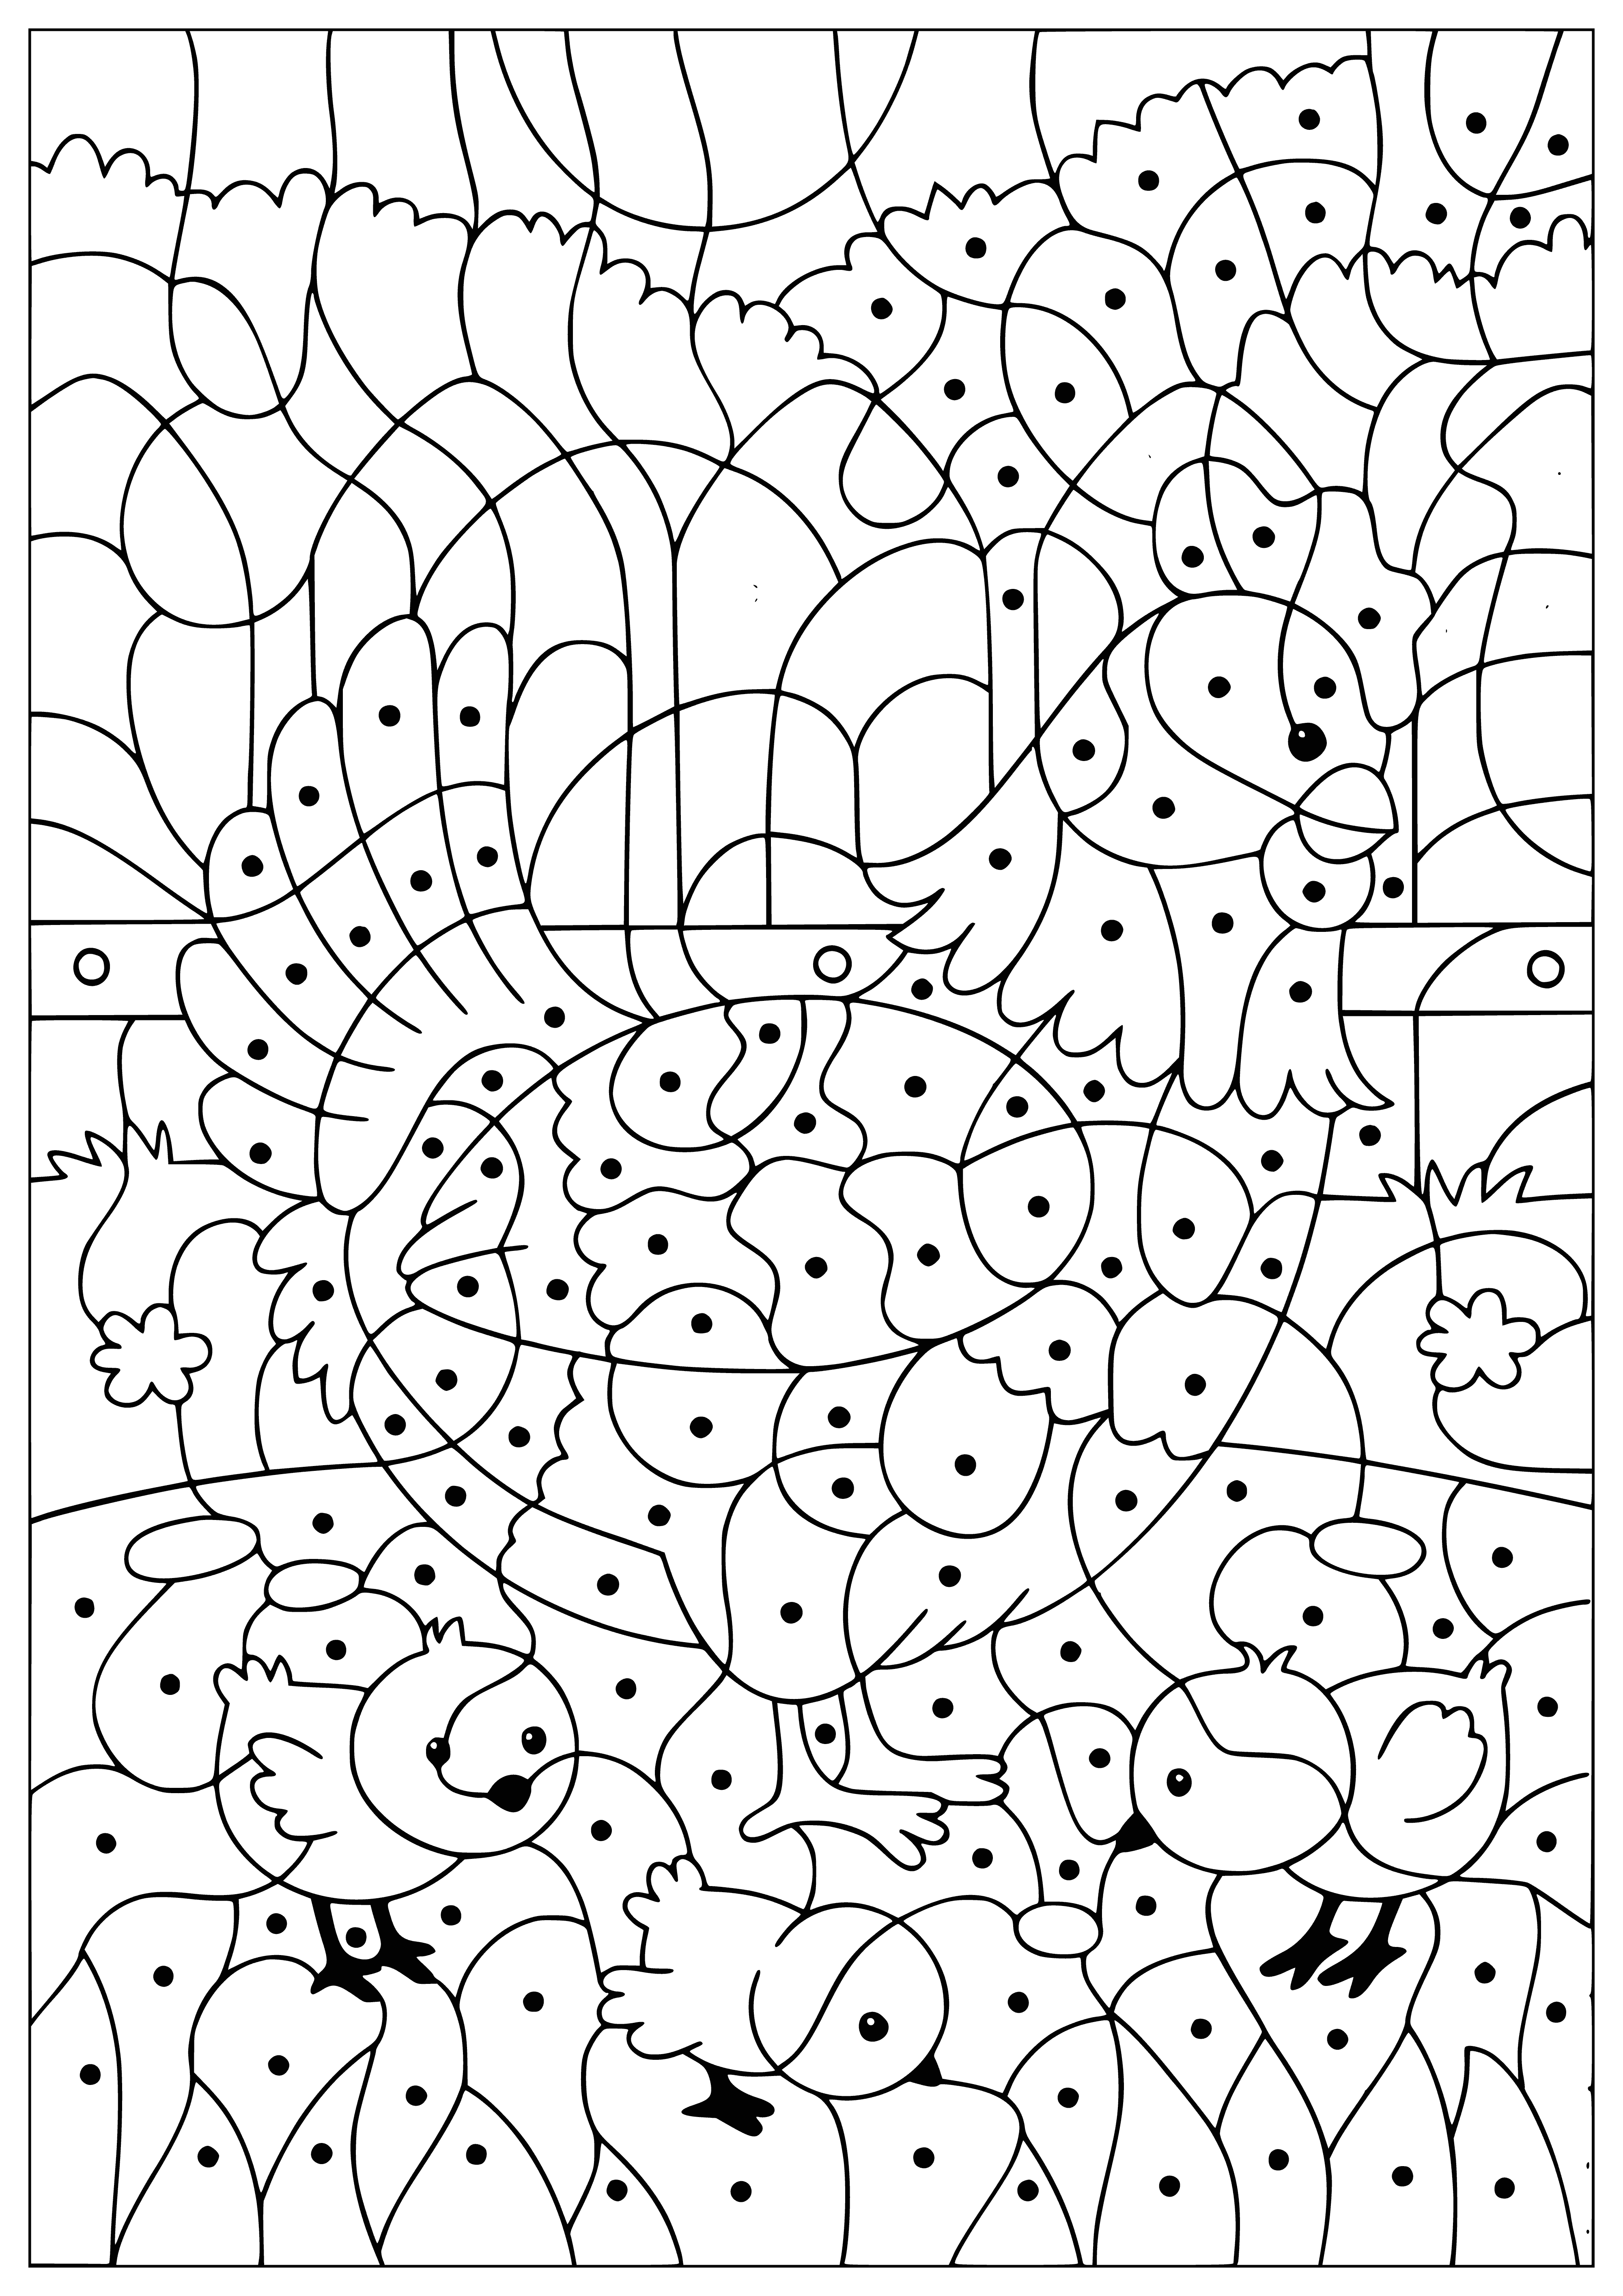 coloring page: Big chicken with multicolored chicks sits in center of coloring page.